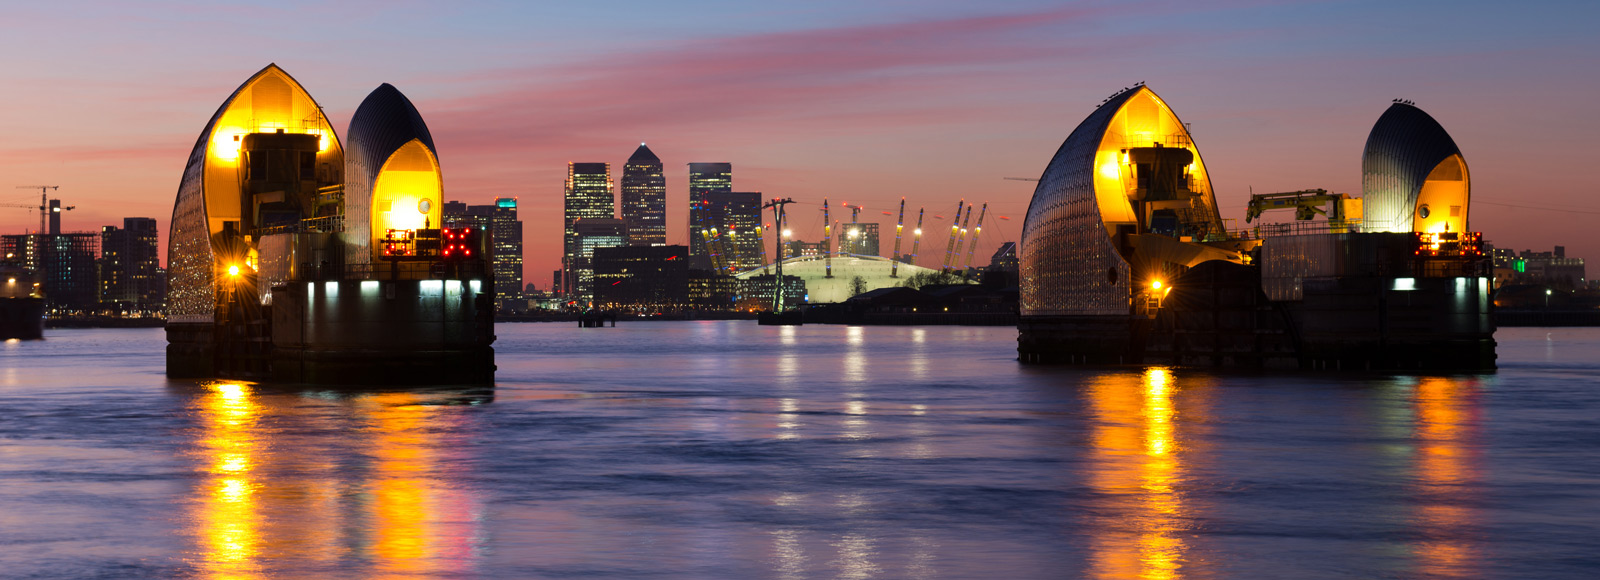 Thames flood barrier and view of Canary Wharf at night